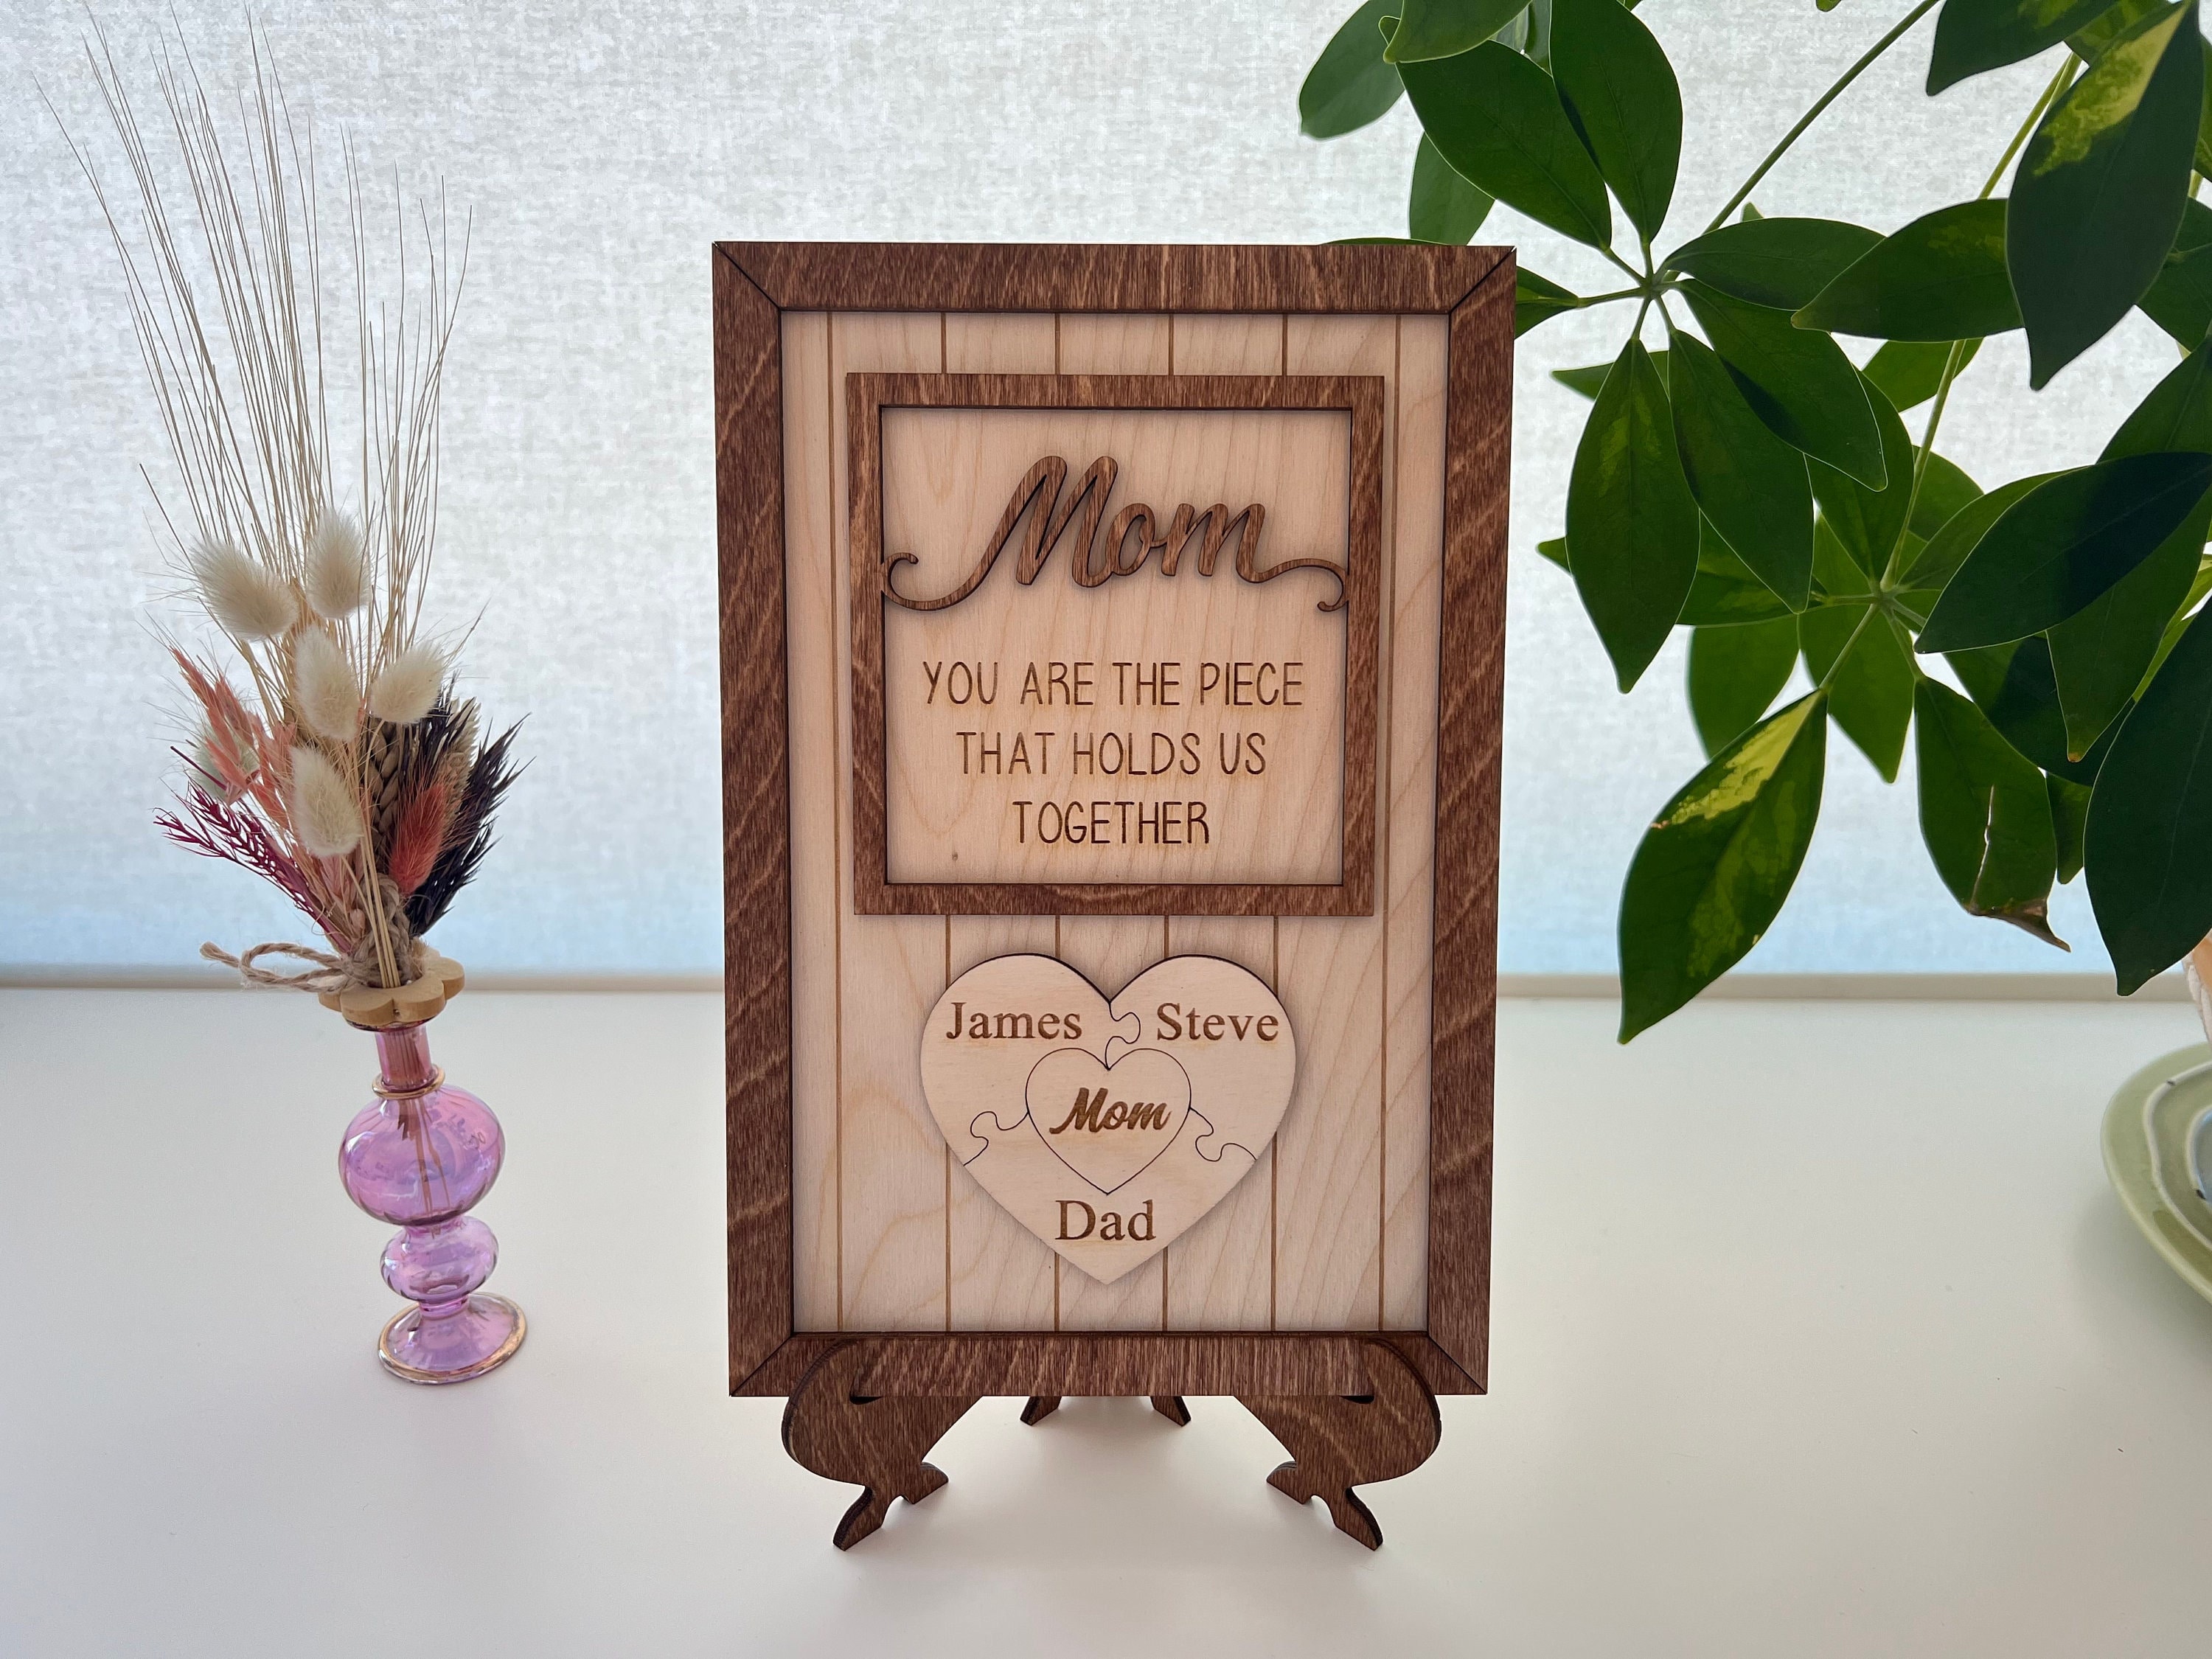 Fufendio Mom Christmas Gifts - Best Mom Ever Gifts - Gifts for Mom from  Daughter, Son - Great Mother